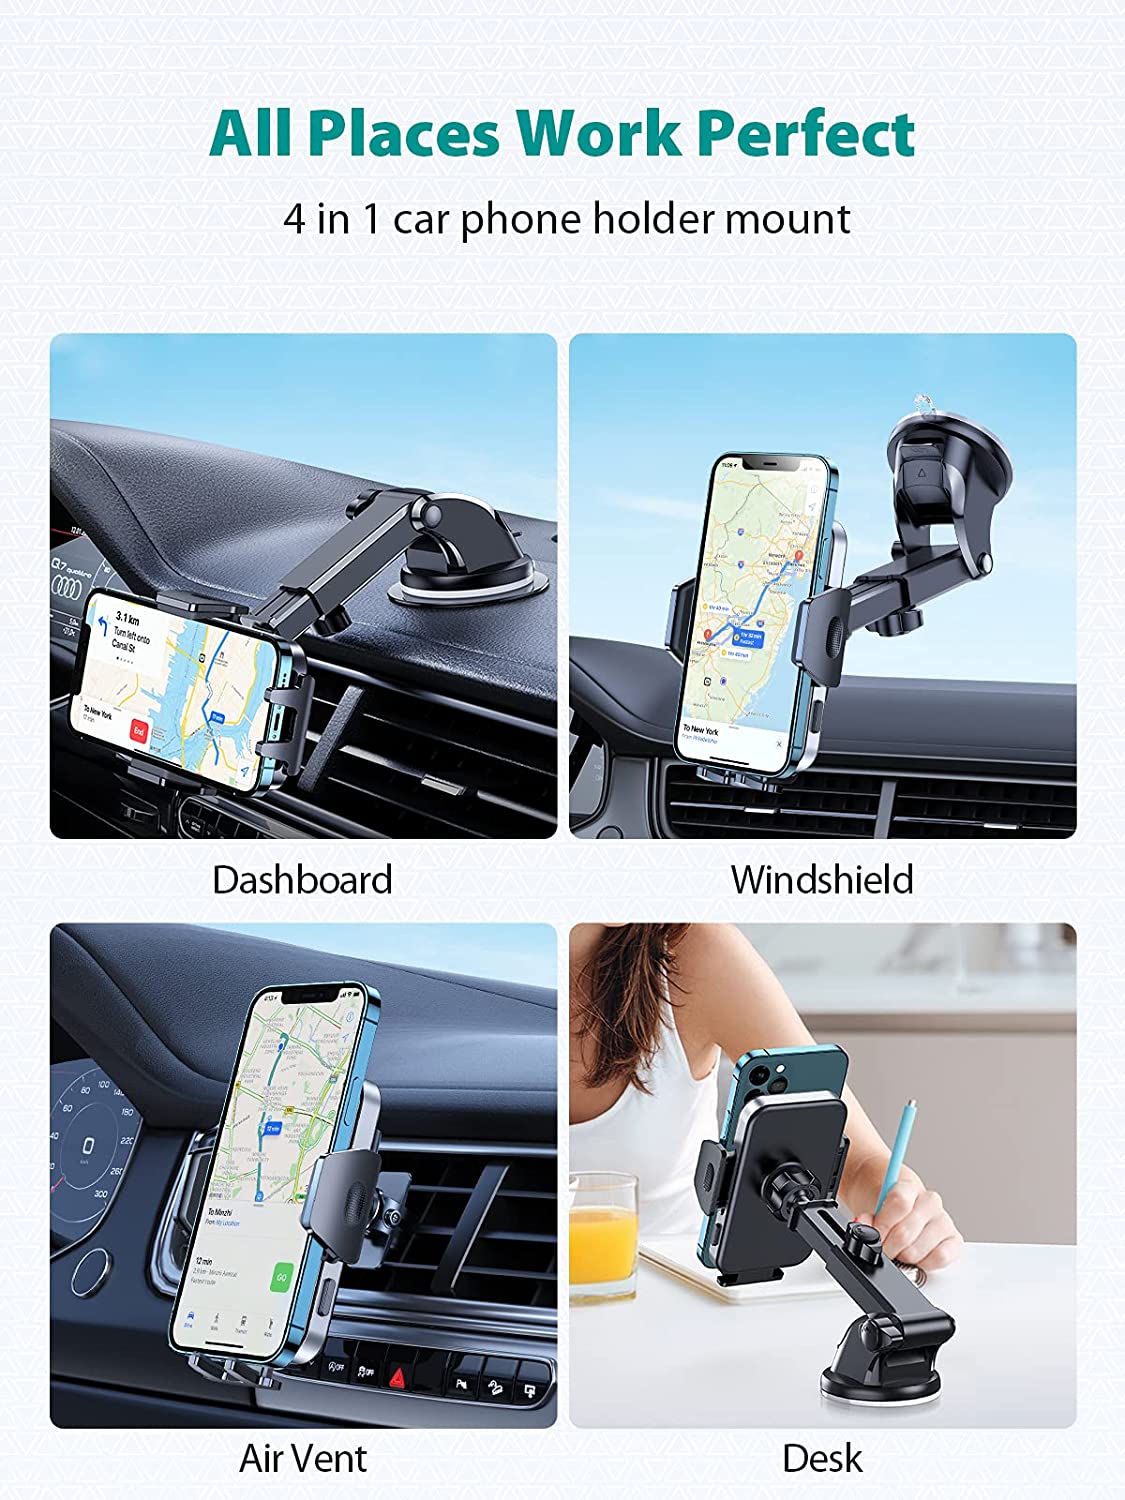 𝟮𝟬𝟮𝟮 𝗕𝗲𝘀𝘁] VICSEED Car Phone Holder Mount [Military-Grade Quality]  3 in 1 Universal Cell Phone Holder Car Dashboard Windshield Air Vent Phone  Mount for Car for iPhone 13 12 Pro Max S22 etc